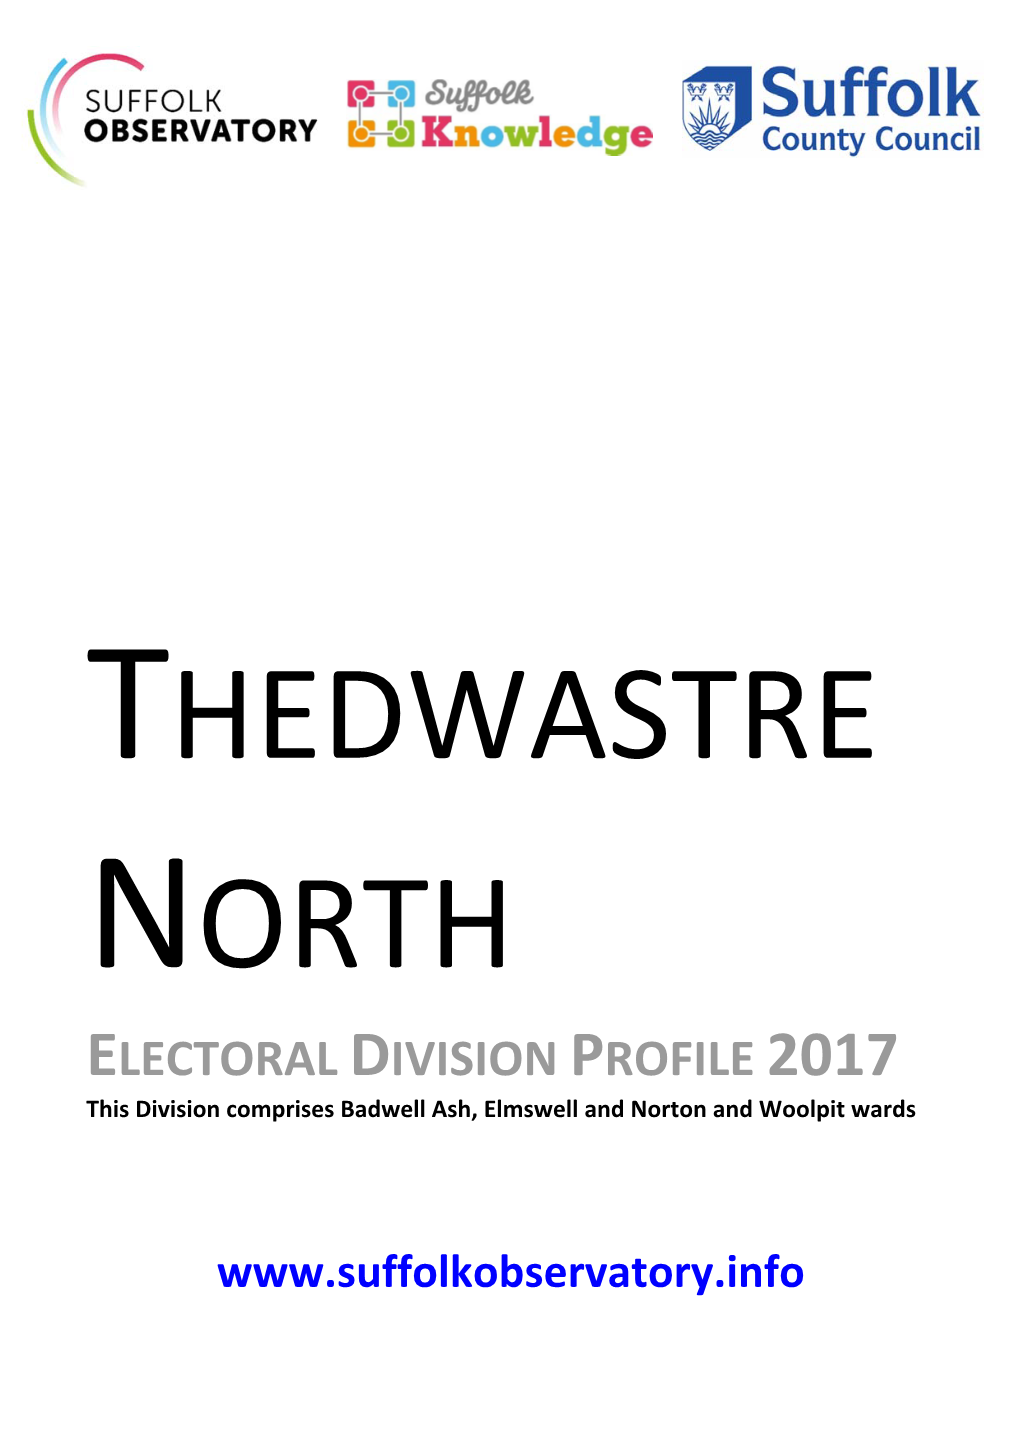 ELECTORAL DIVISION PROFILE 2017 This Division Comprises Badwell Ash, Elmswell and Norton and Woolpit Wards